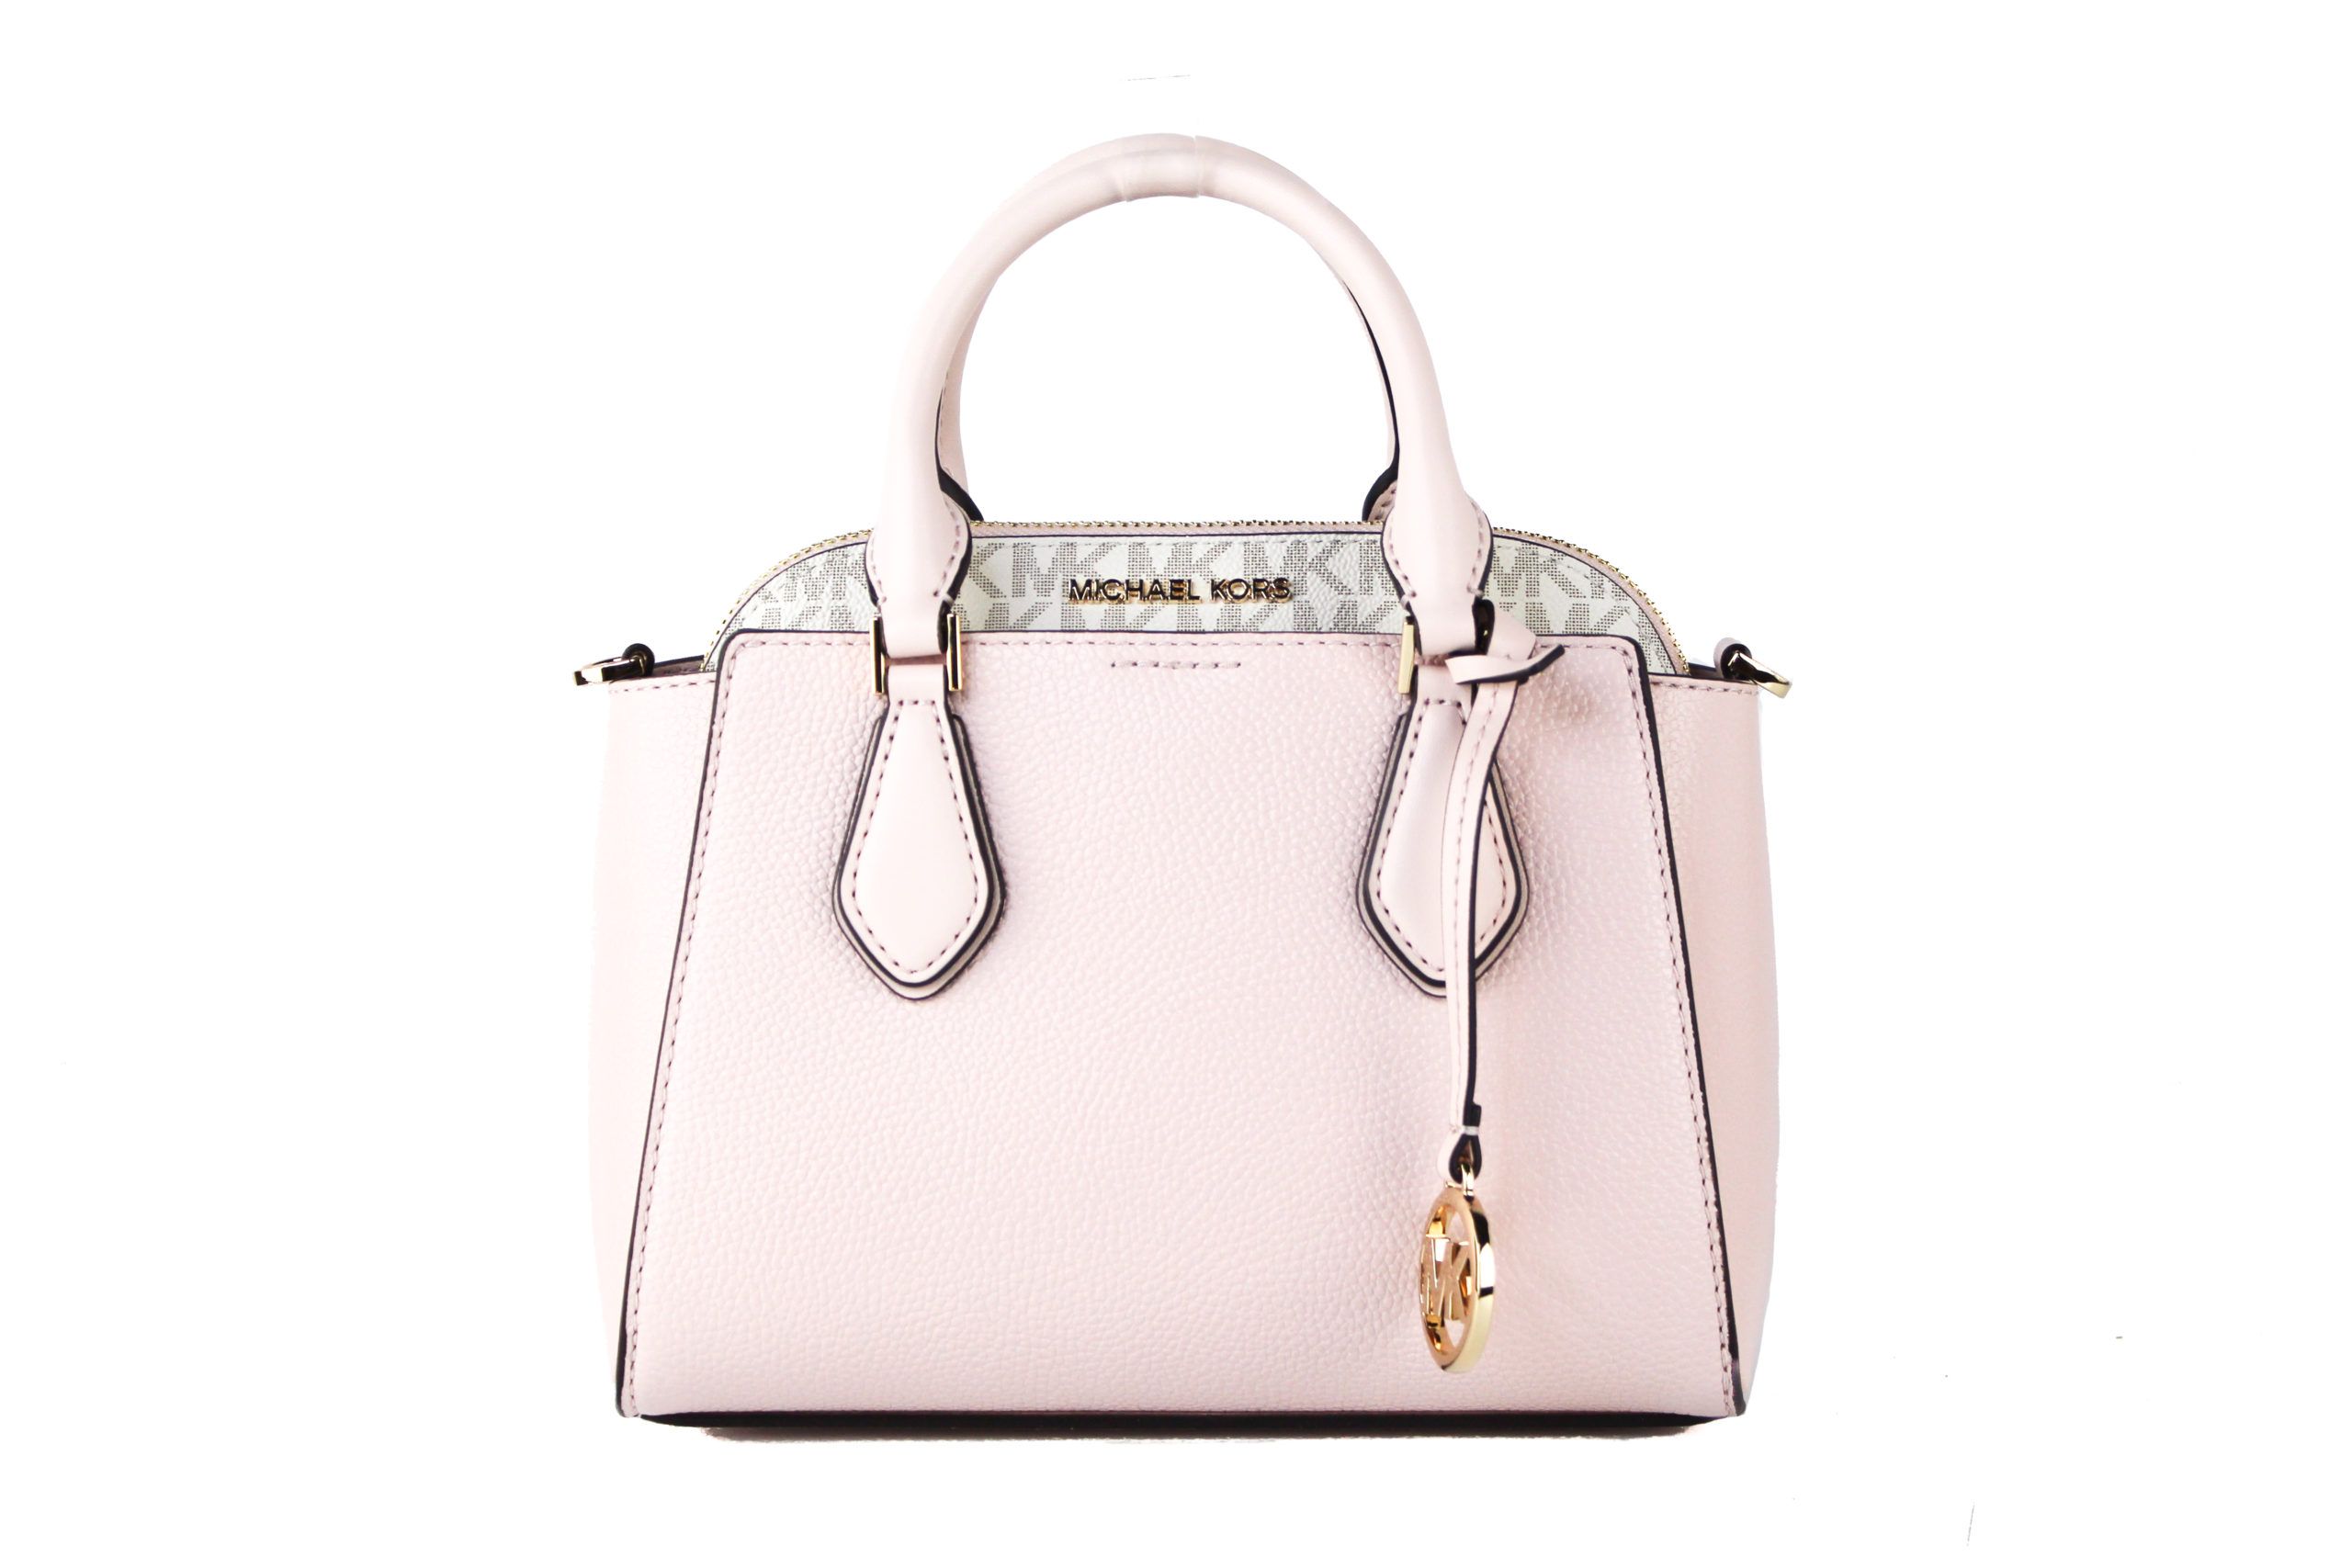 Brand New with Tags (100% Authentic). 
Style: . Michael Kors Daria Small 2-in-1 Satchel Handbag (Powder Blush/Vanilla Signature)
Material: . Pebble Leather &Signature PVC
Features: Satchel Bag with Removable Dome Bag, Adjustable/Detachable Crossbody Strap. 
Measures: 
Satchel: 21.59cm. W x 15.24cm H x 10.16cm D 
Dome: 21.59cm W x 17.78cm H x 7.62cm D